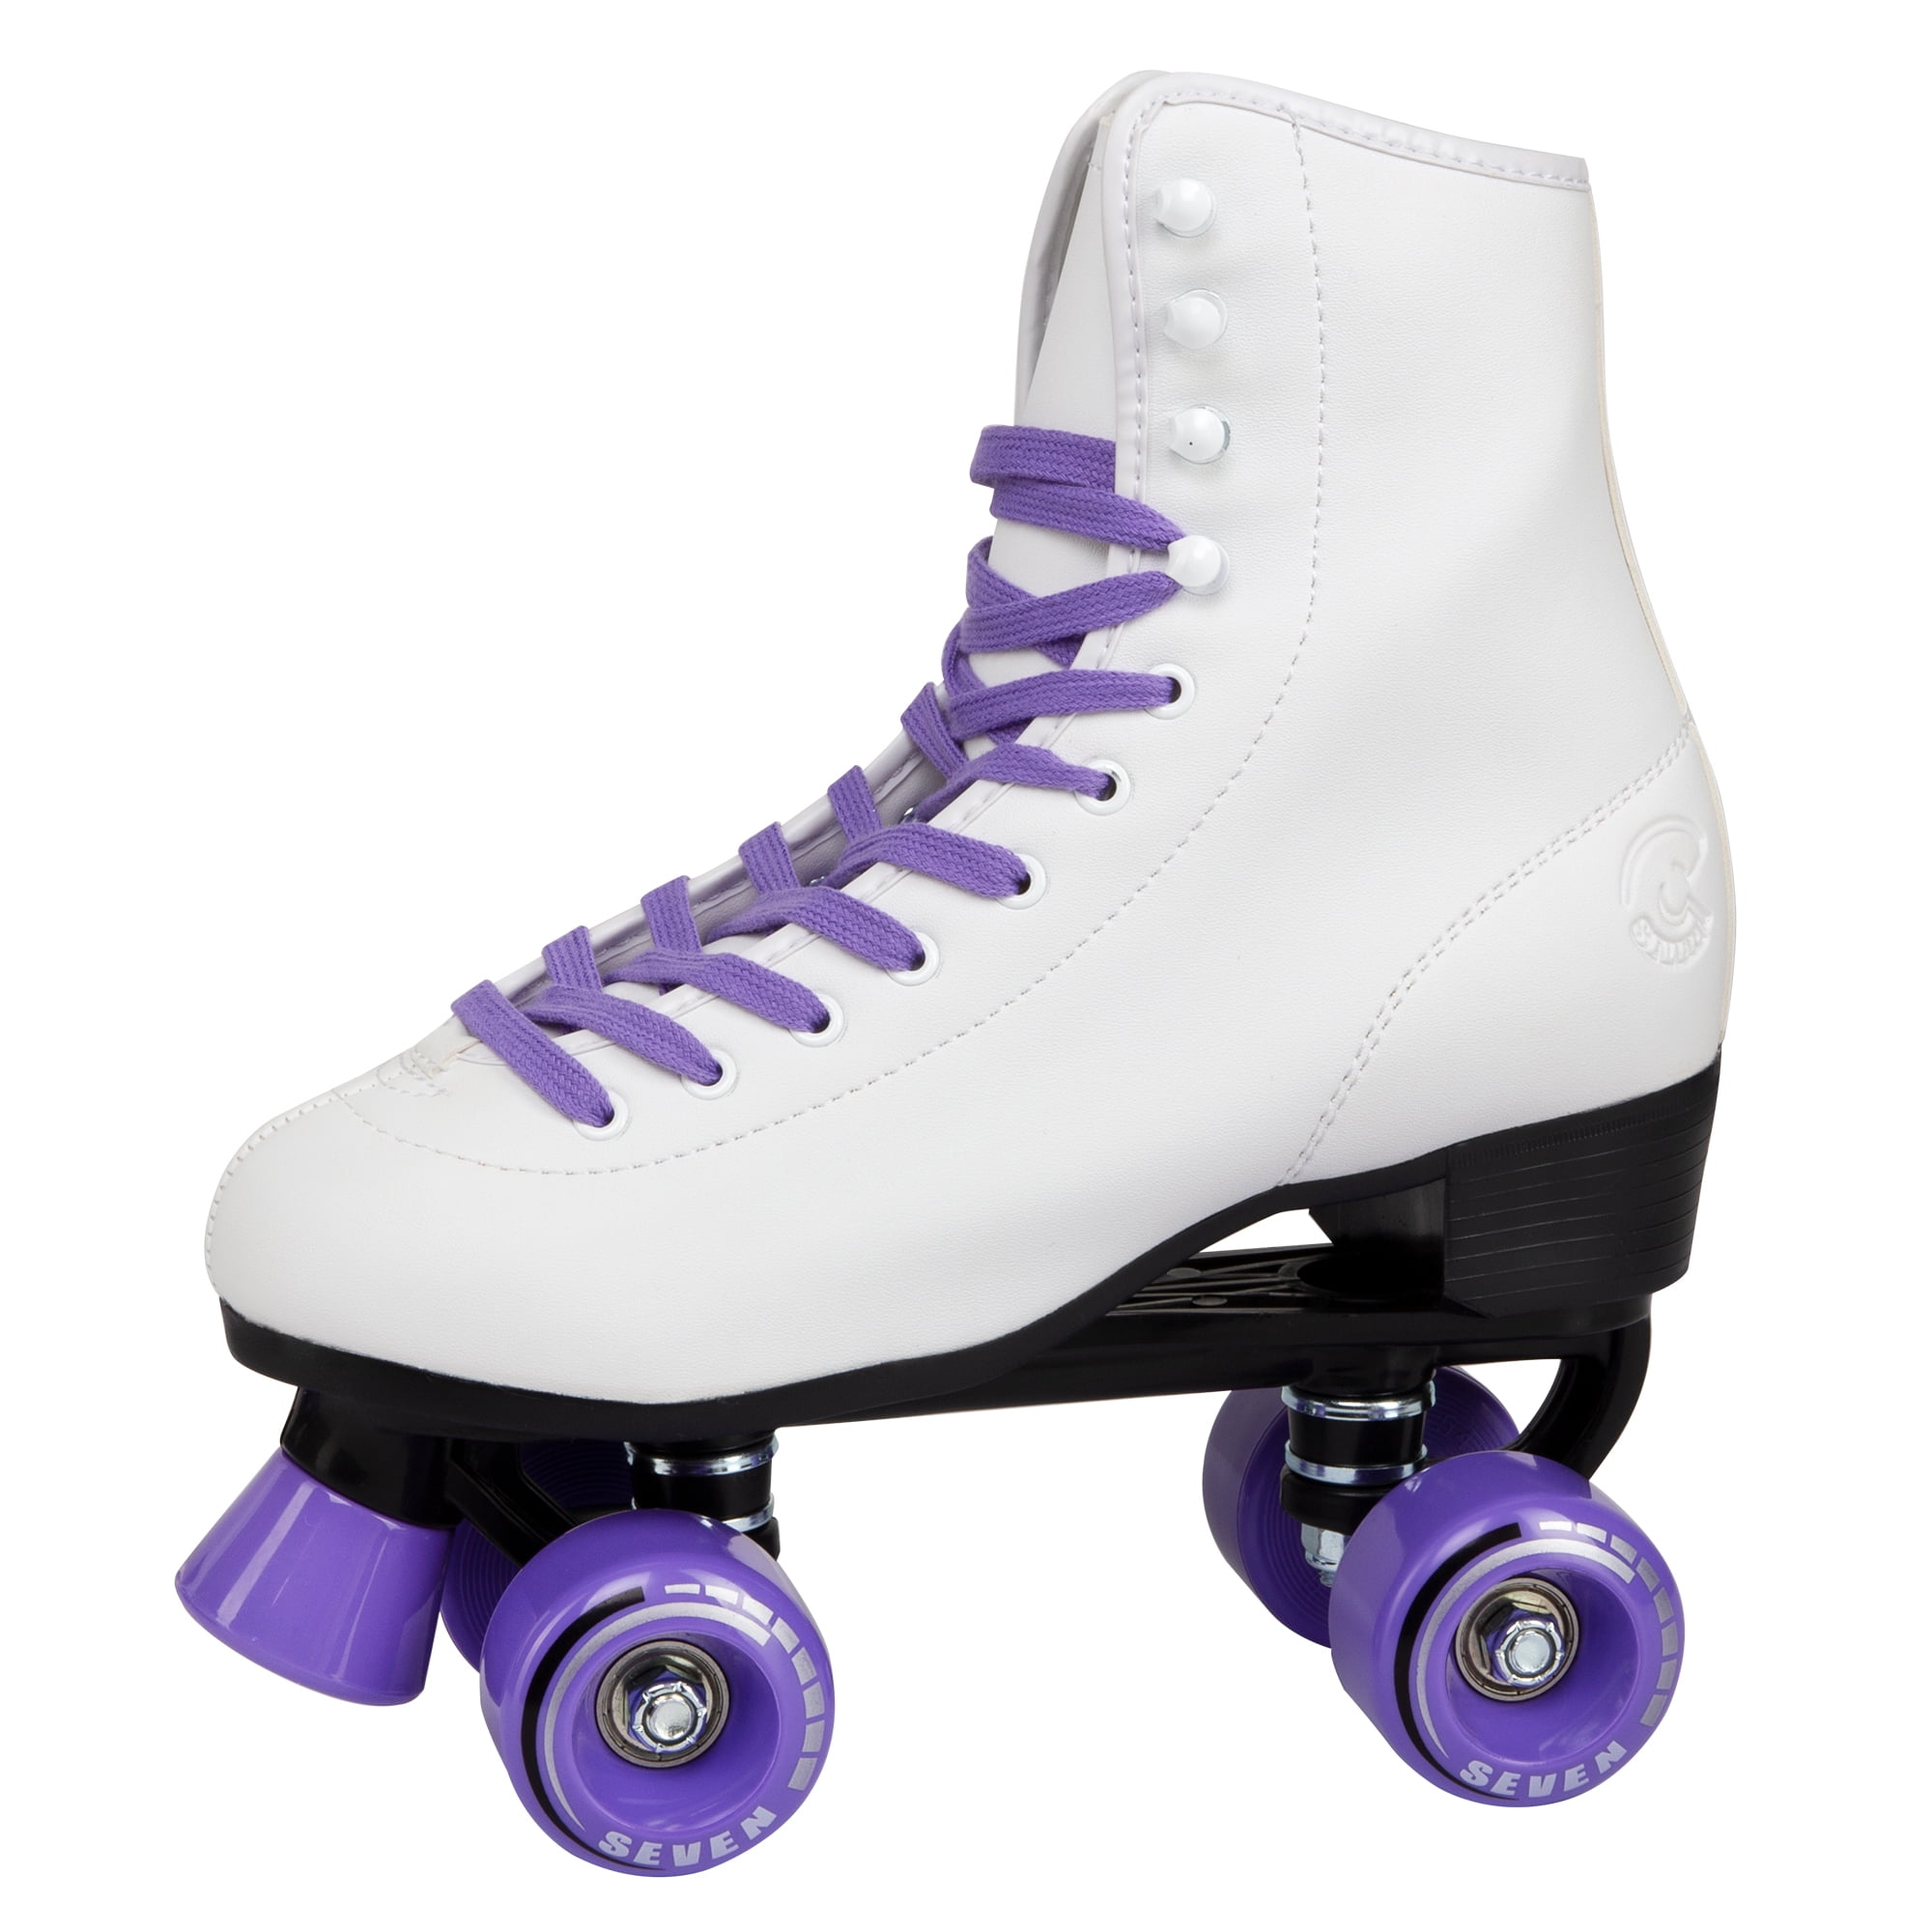 C SEVEN Roller Skates for Outdoor Skating Faux Leather 